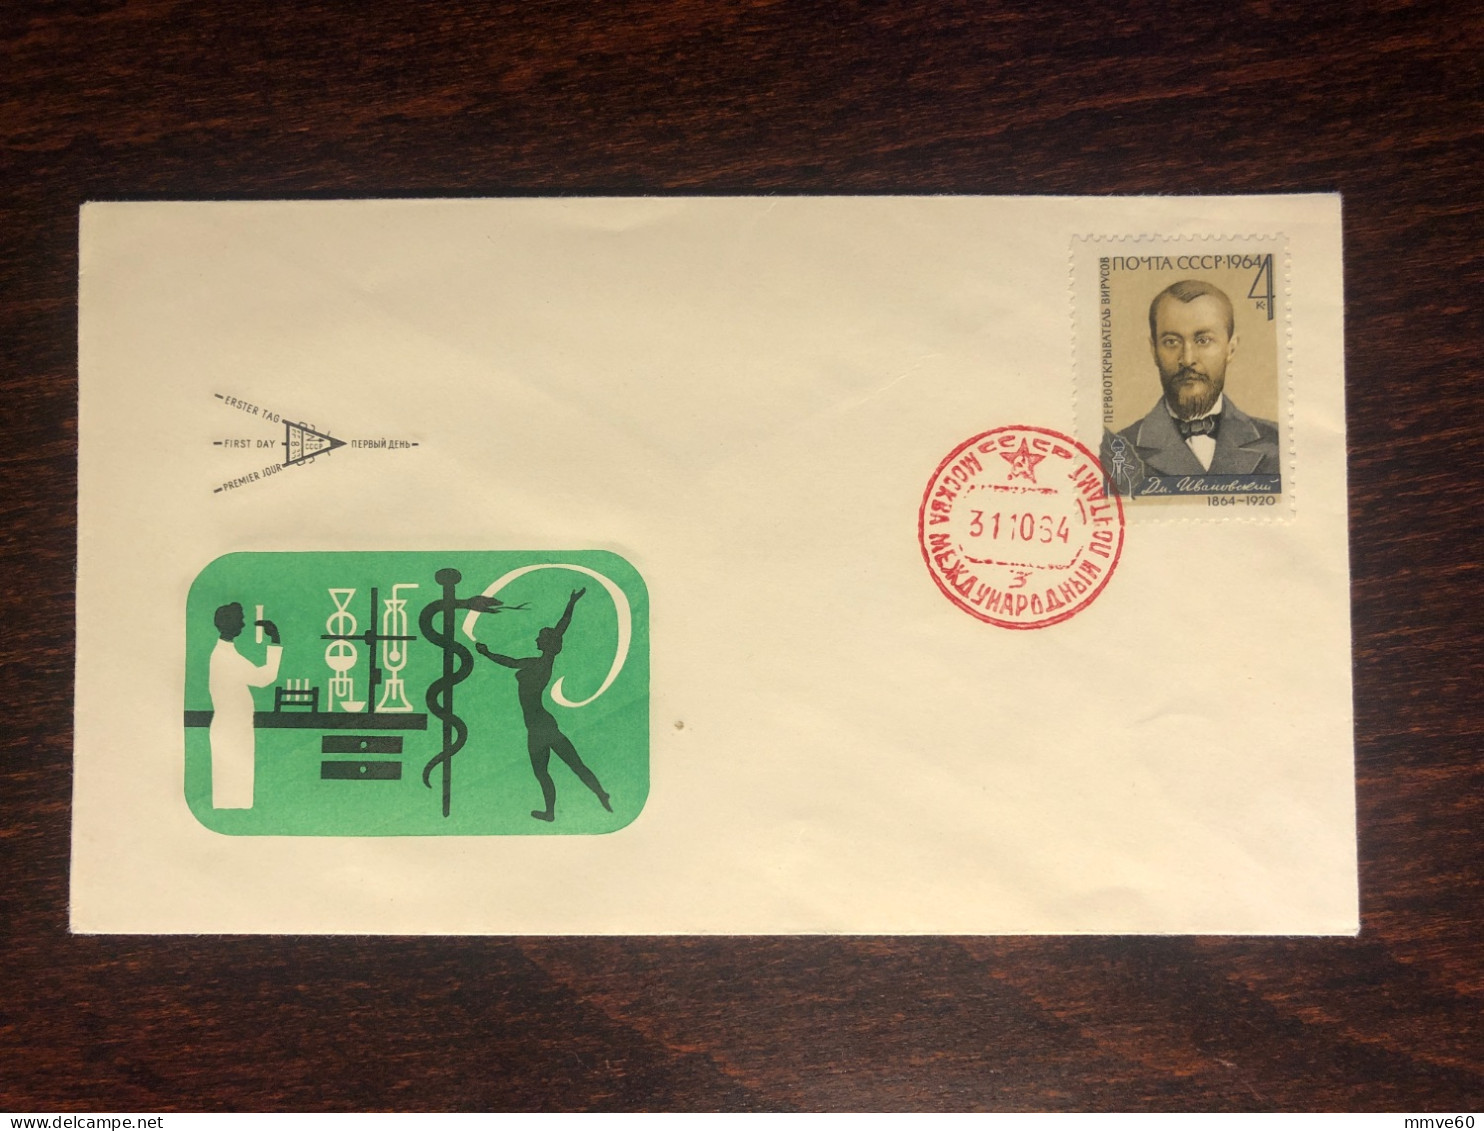 RUSSIA USSR FDC COVER 1964 YEAR IVANOVSKY VIROLOGY BACTERIOLOGY HEALTH MEDICINE STAMPS - Storia Postale